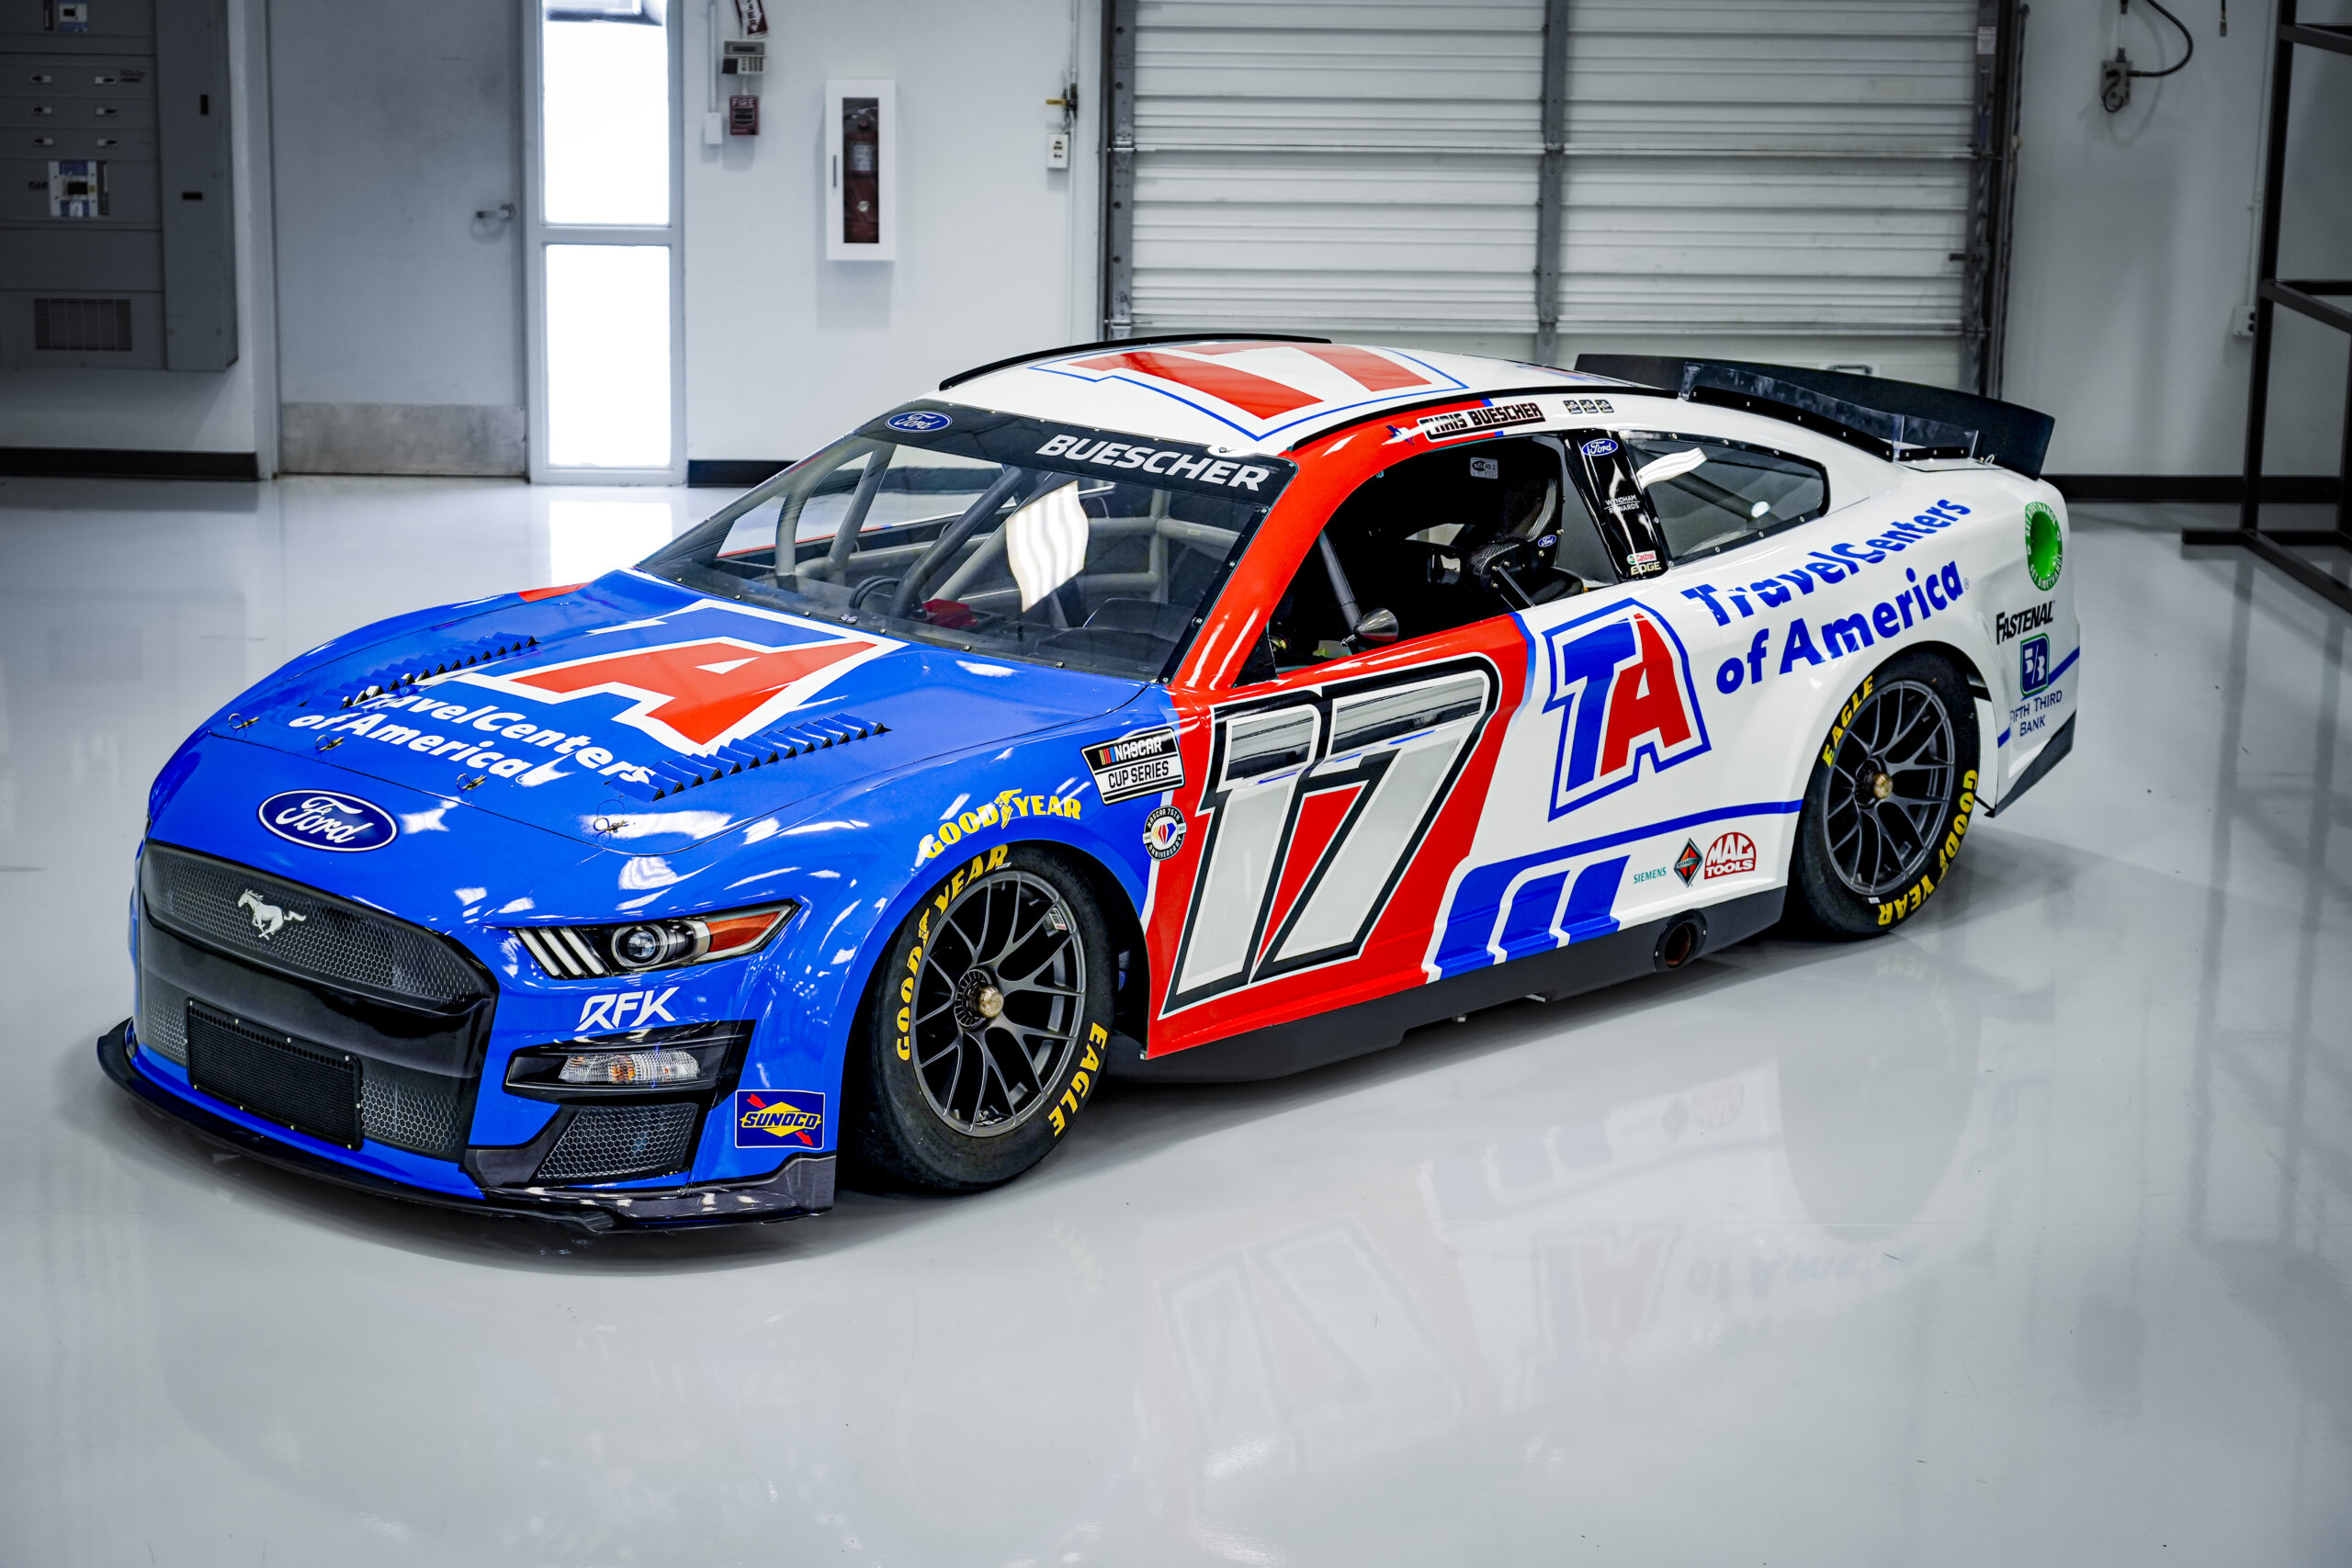 TravelCenters of America to Ride Along Buescher’s Car in Vegas